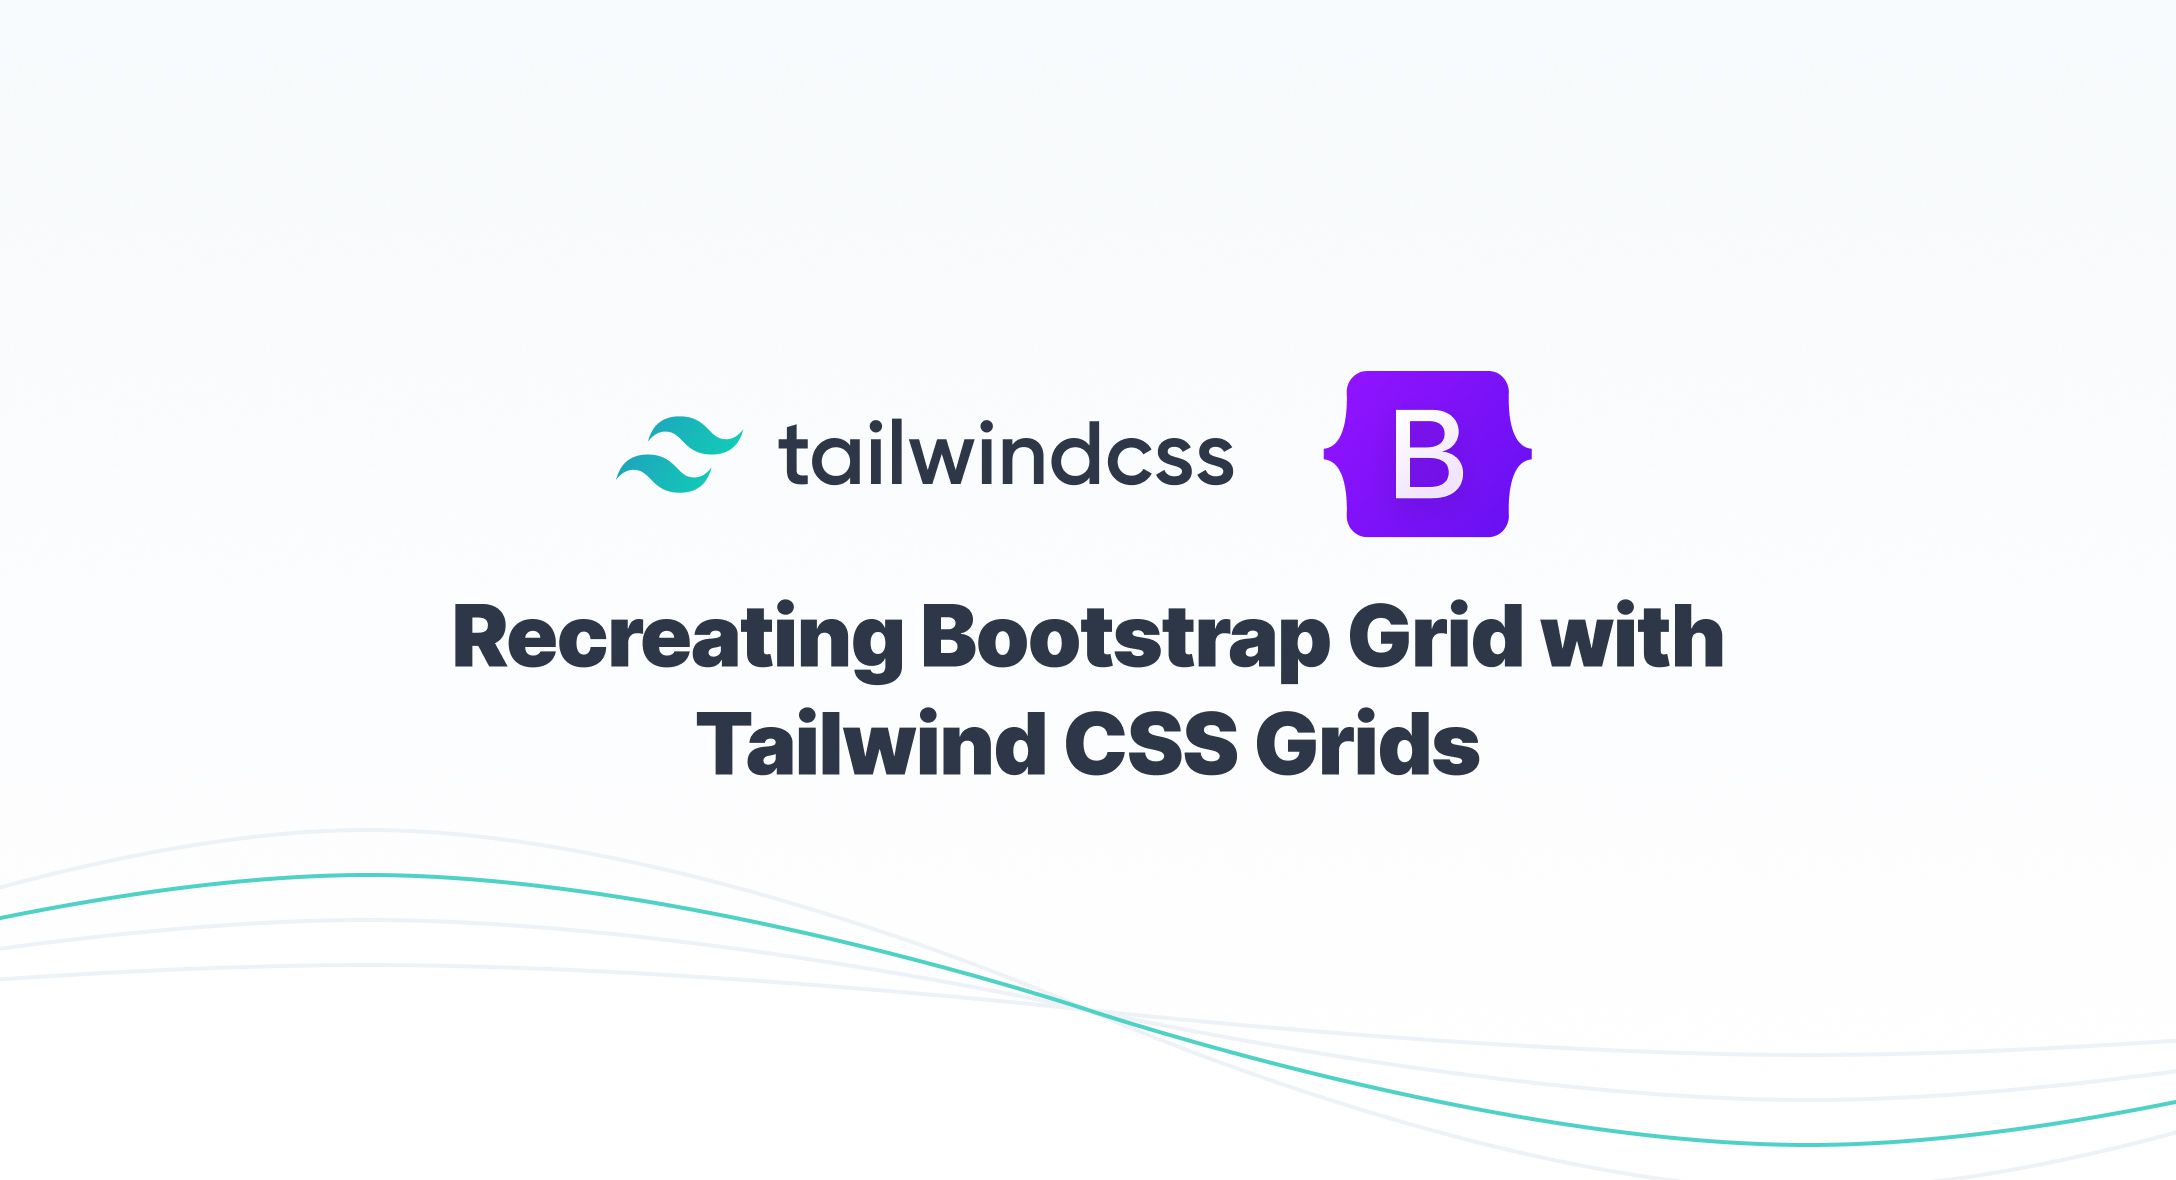 Recreating Bootstrap Grid with Tailwind CSS Grids